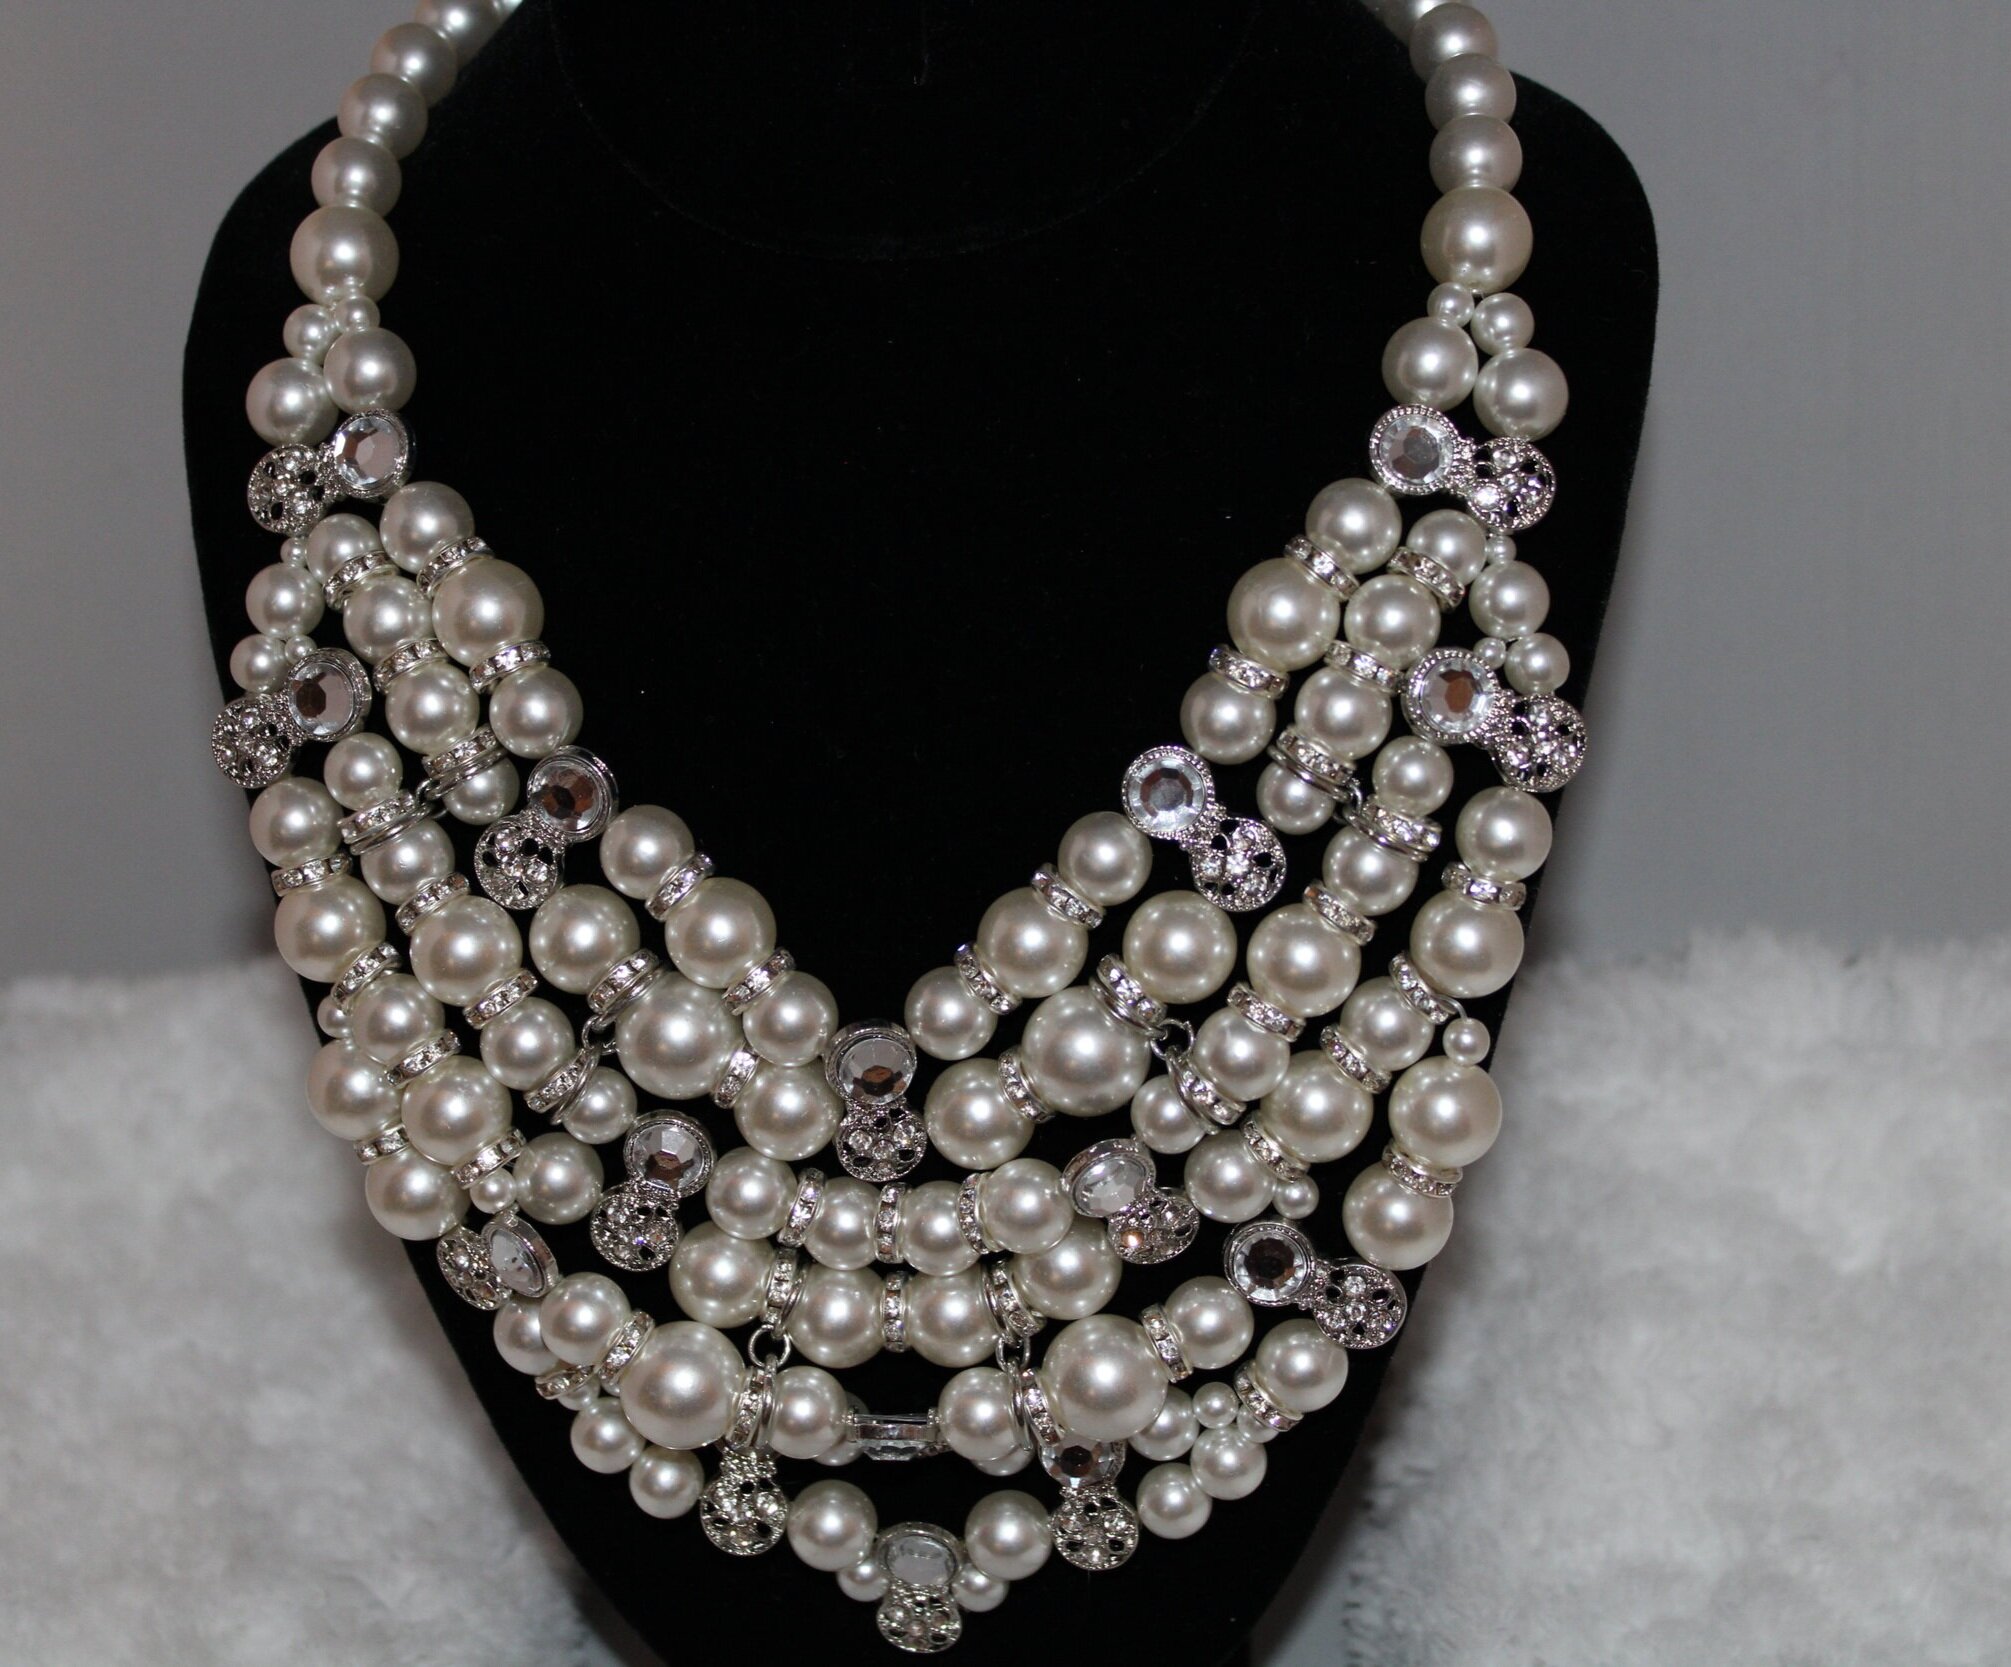 Flauna||next day shipping|usa only|pearl jewelry|pearls|accessories|on sale  — Christina E. Pearls